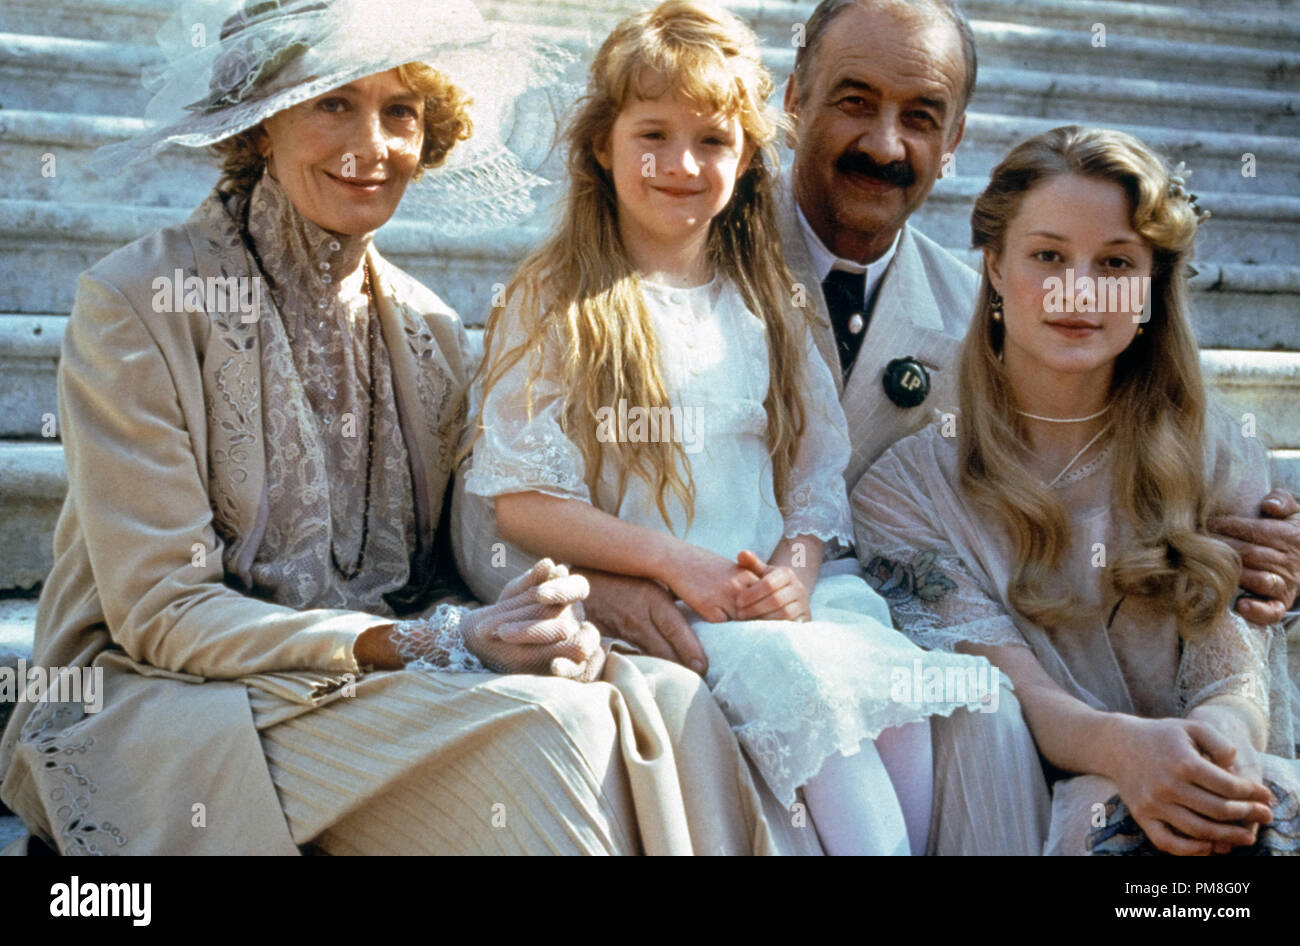 Film still / publicity still from 'The House of the Spirits' Vanessa Redgrave, Jane Gray, Armin Mueller-Stahl, Teri Polo © 1993 Miramax Photo Credit: Rolf Konow   File Reference # 31371081THA  For Editorial Use Only All Rights Reserved Stock Photo